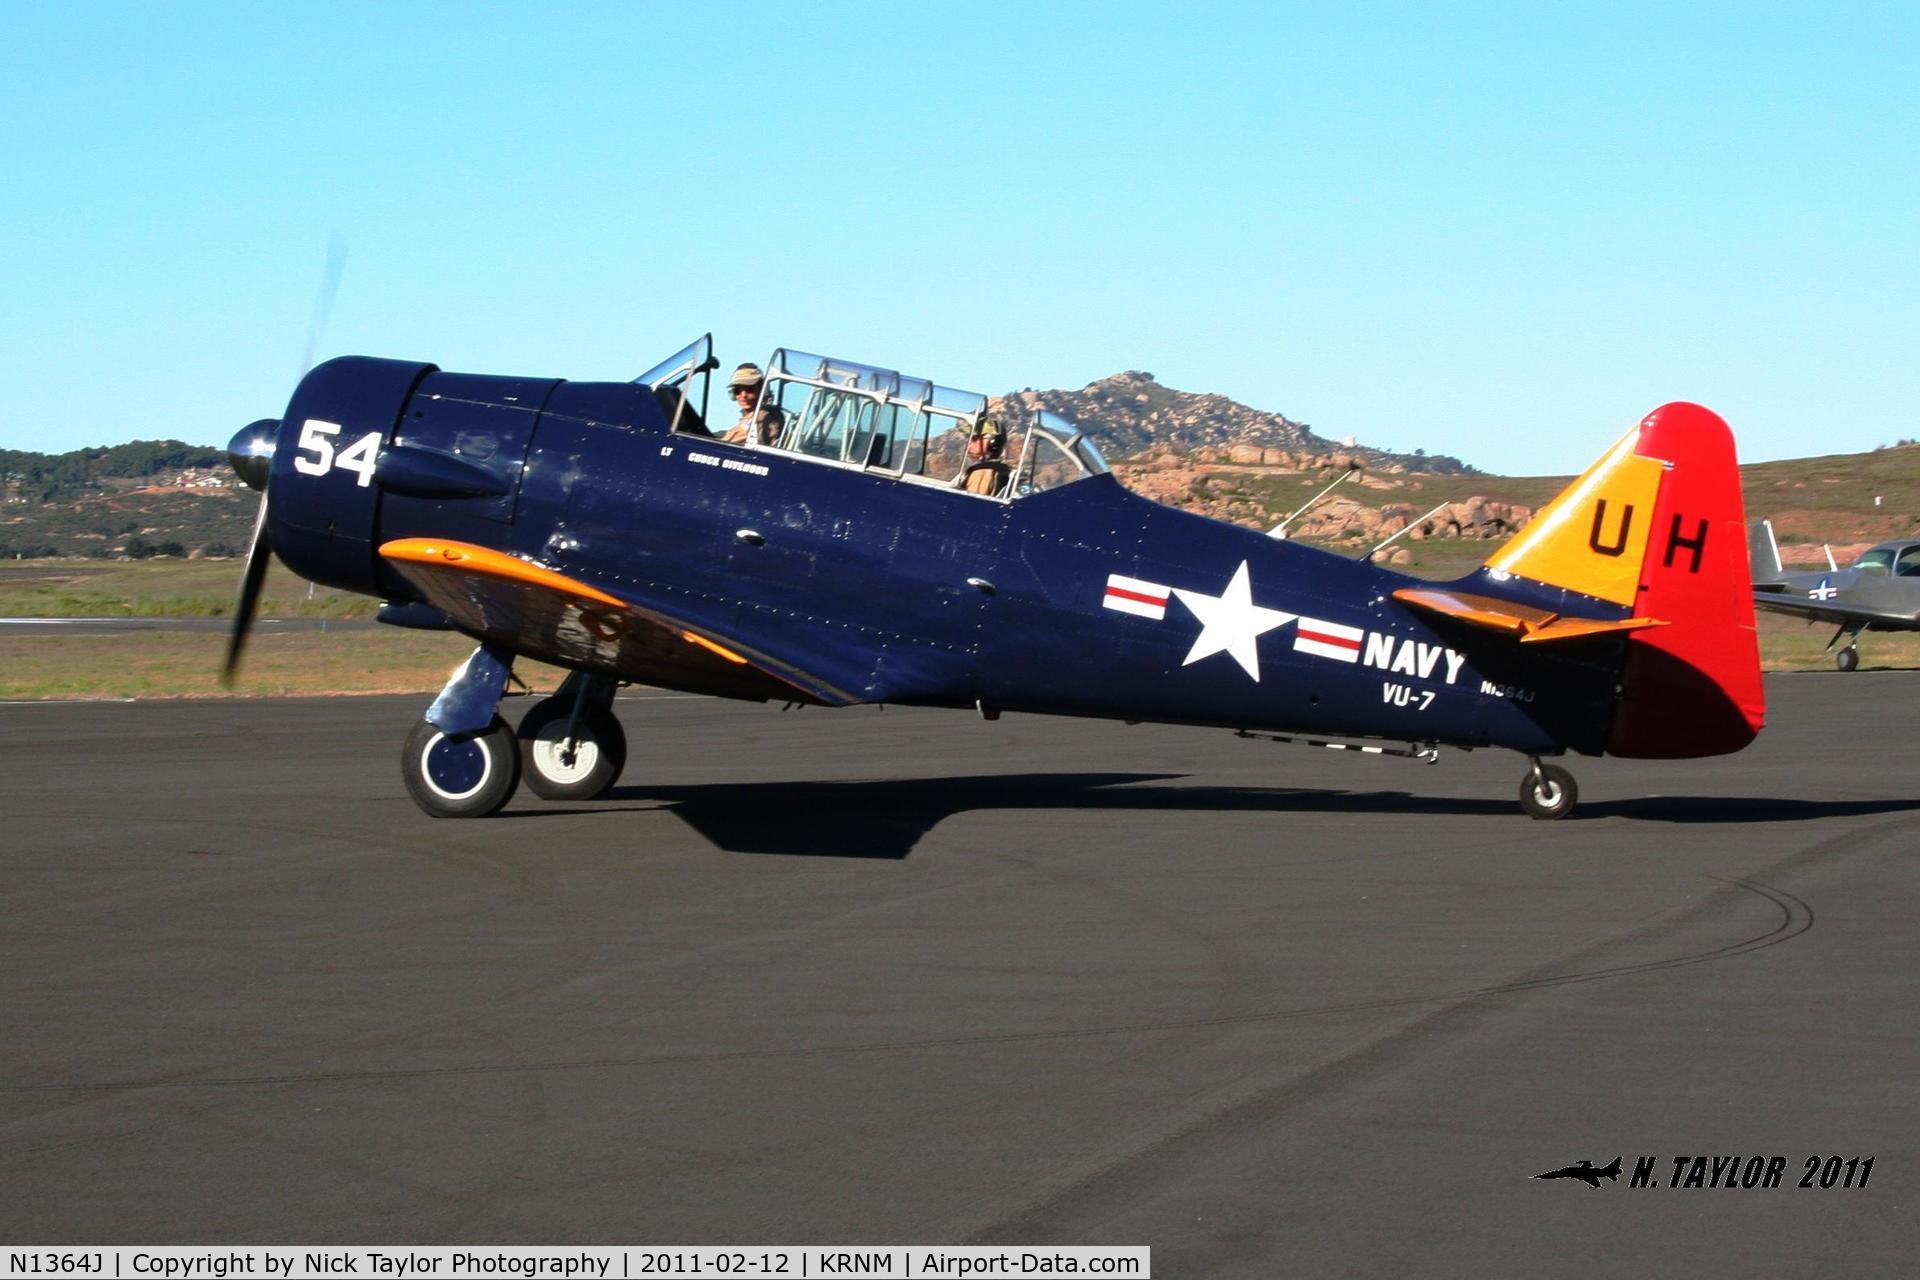 N1364J, 1951 North American T-6G Texan C/N 188-71, The Doc heading out